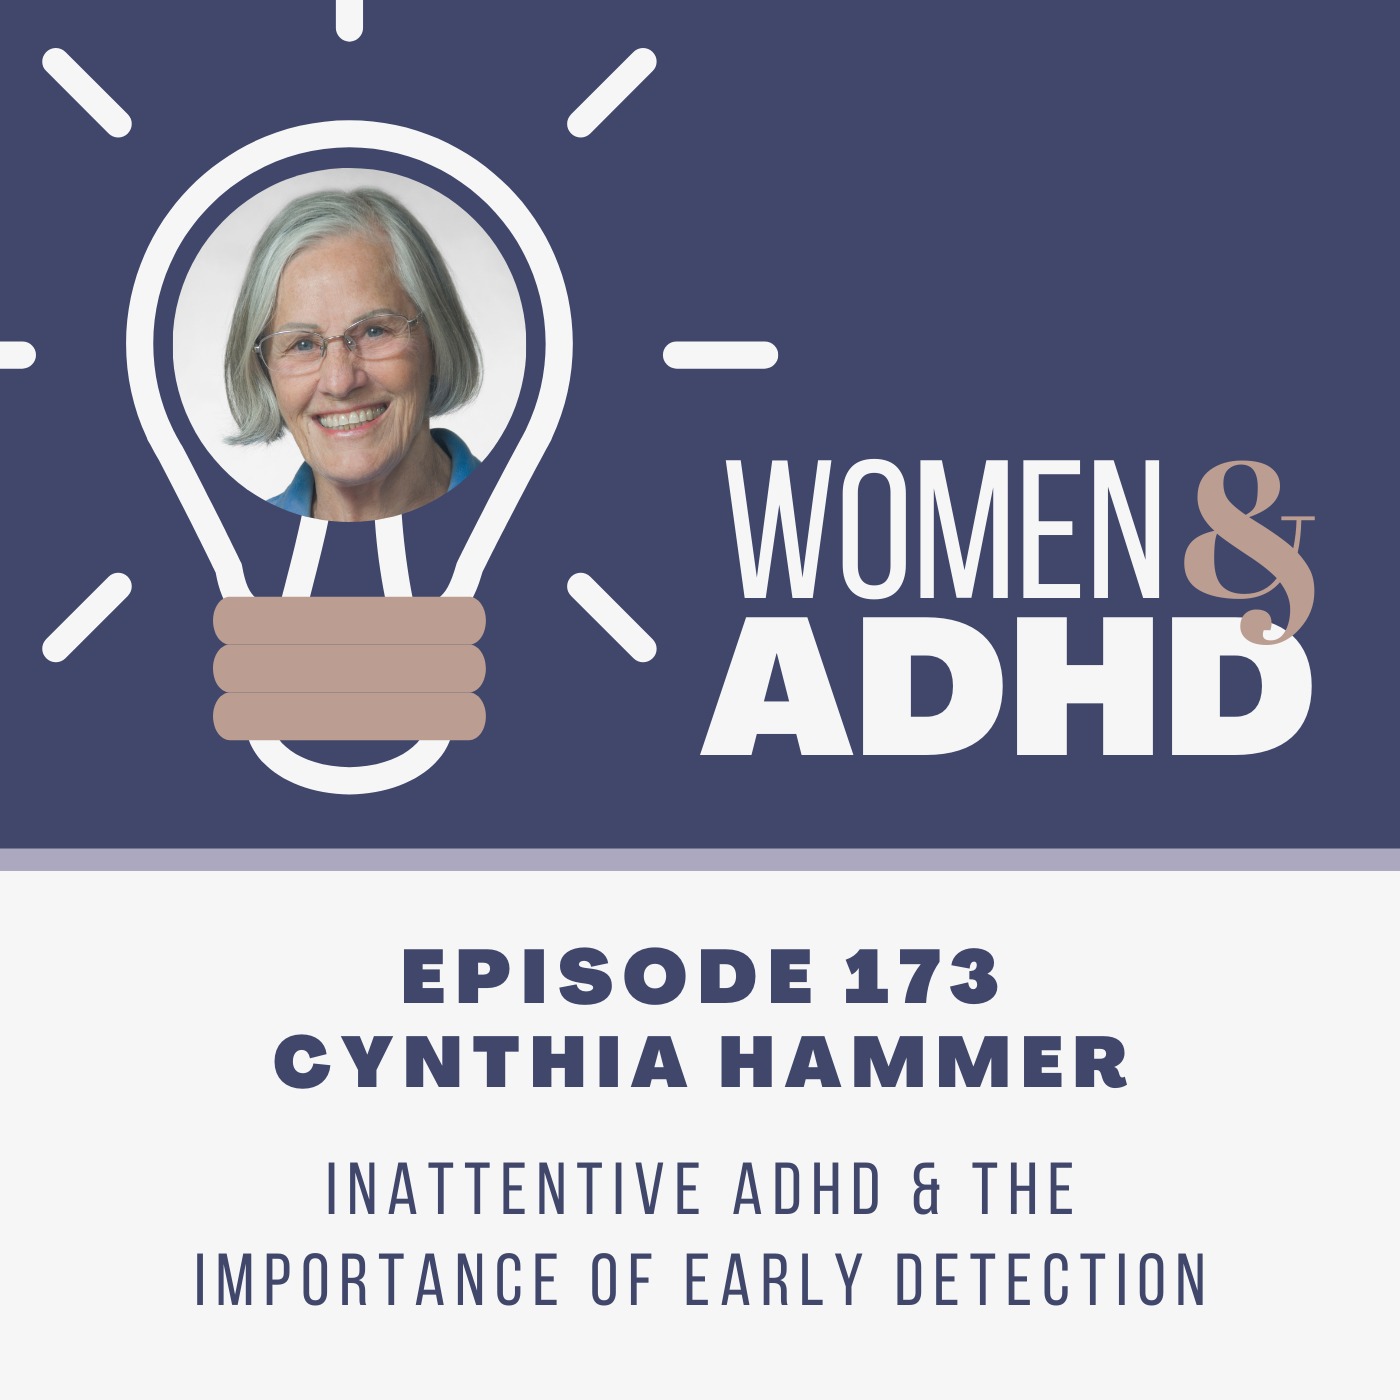 Cynthia Hammer: Inattentive ADHD & the importance of early detection